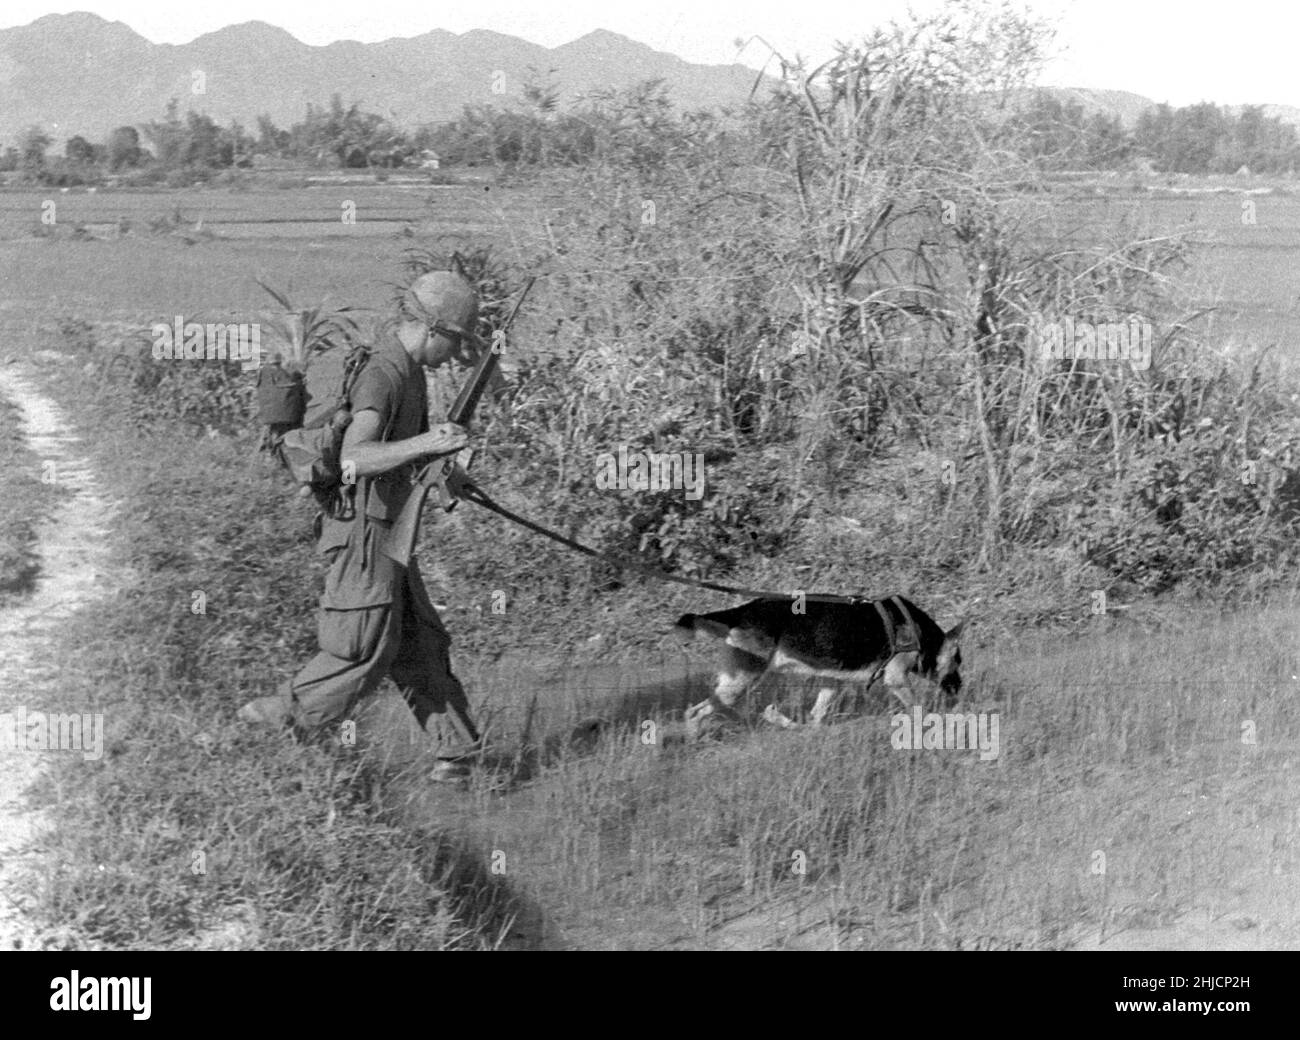 SP4 Bealock and scout dog 'Chief' (German Shepherd) on patrol in Vietnam, circa 1960s/1970s. Stock Photo